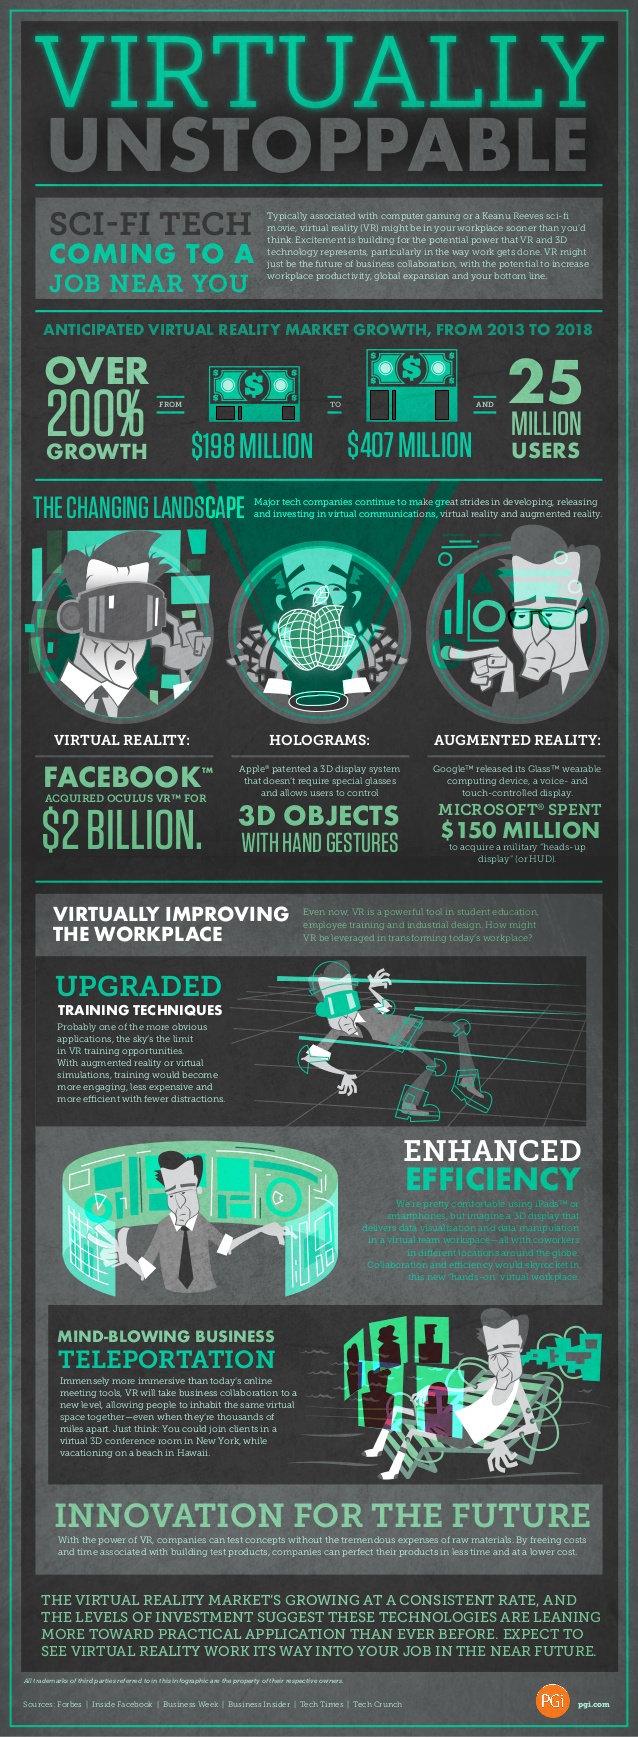 Could Virtual Reality Be Taking Over Your Workplace? (infographic)